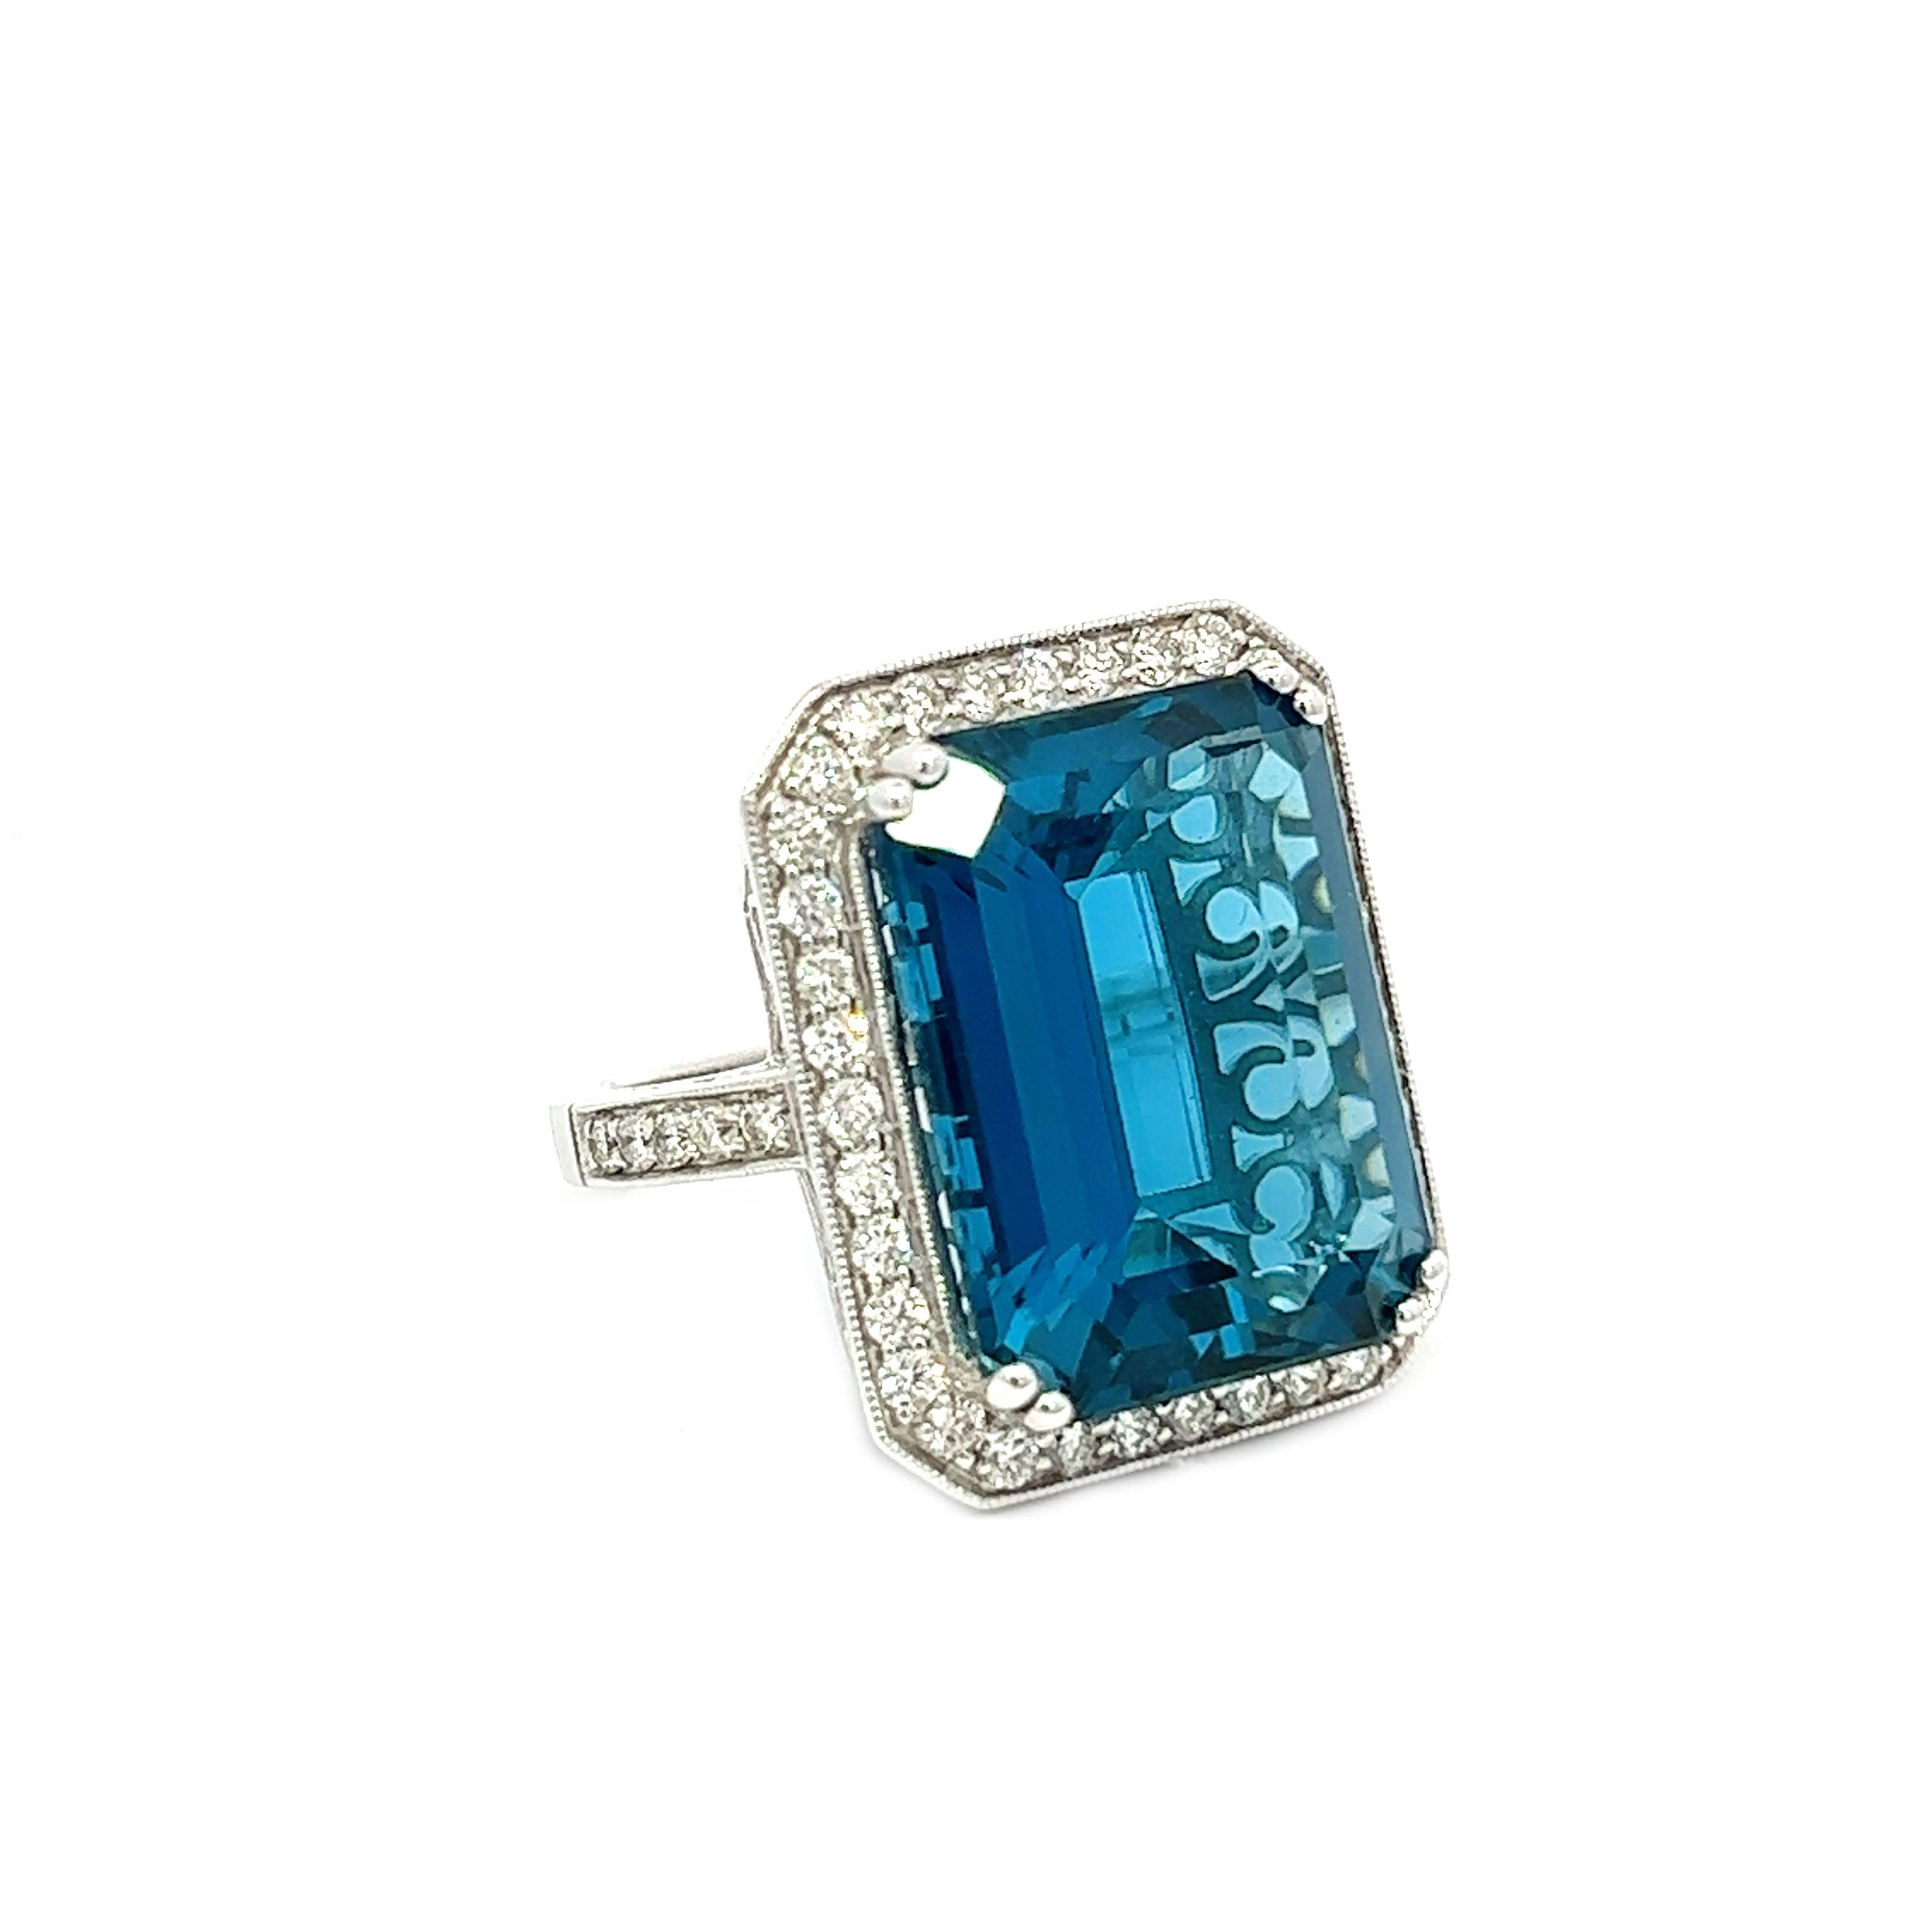 This exquisite ring features a stunning emerald-cut London Blue Topaz that is perfectly complemented by round brilliant diamonds in H Color and VS Clarity. The ring is expertly crafted in 14k white gold, making it a timeless and elegant piece of